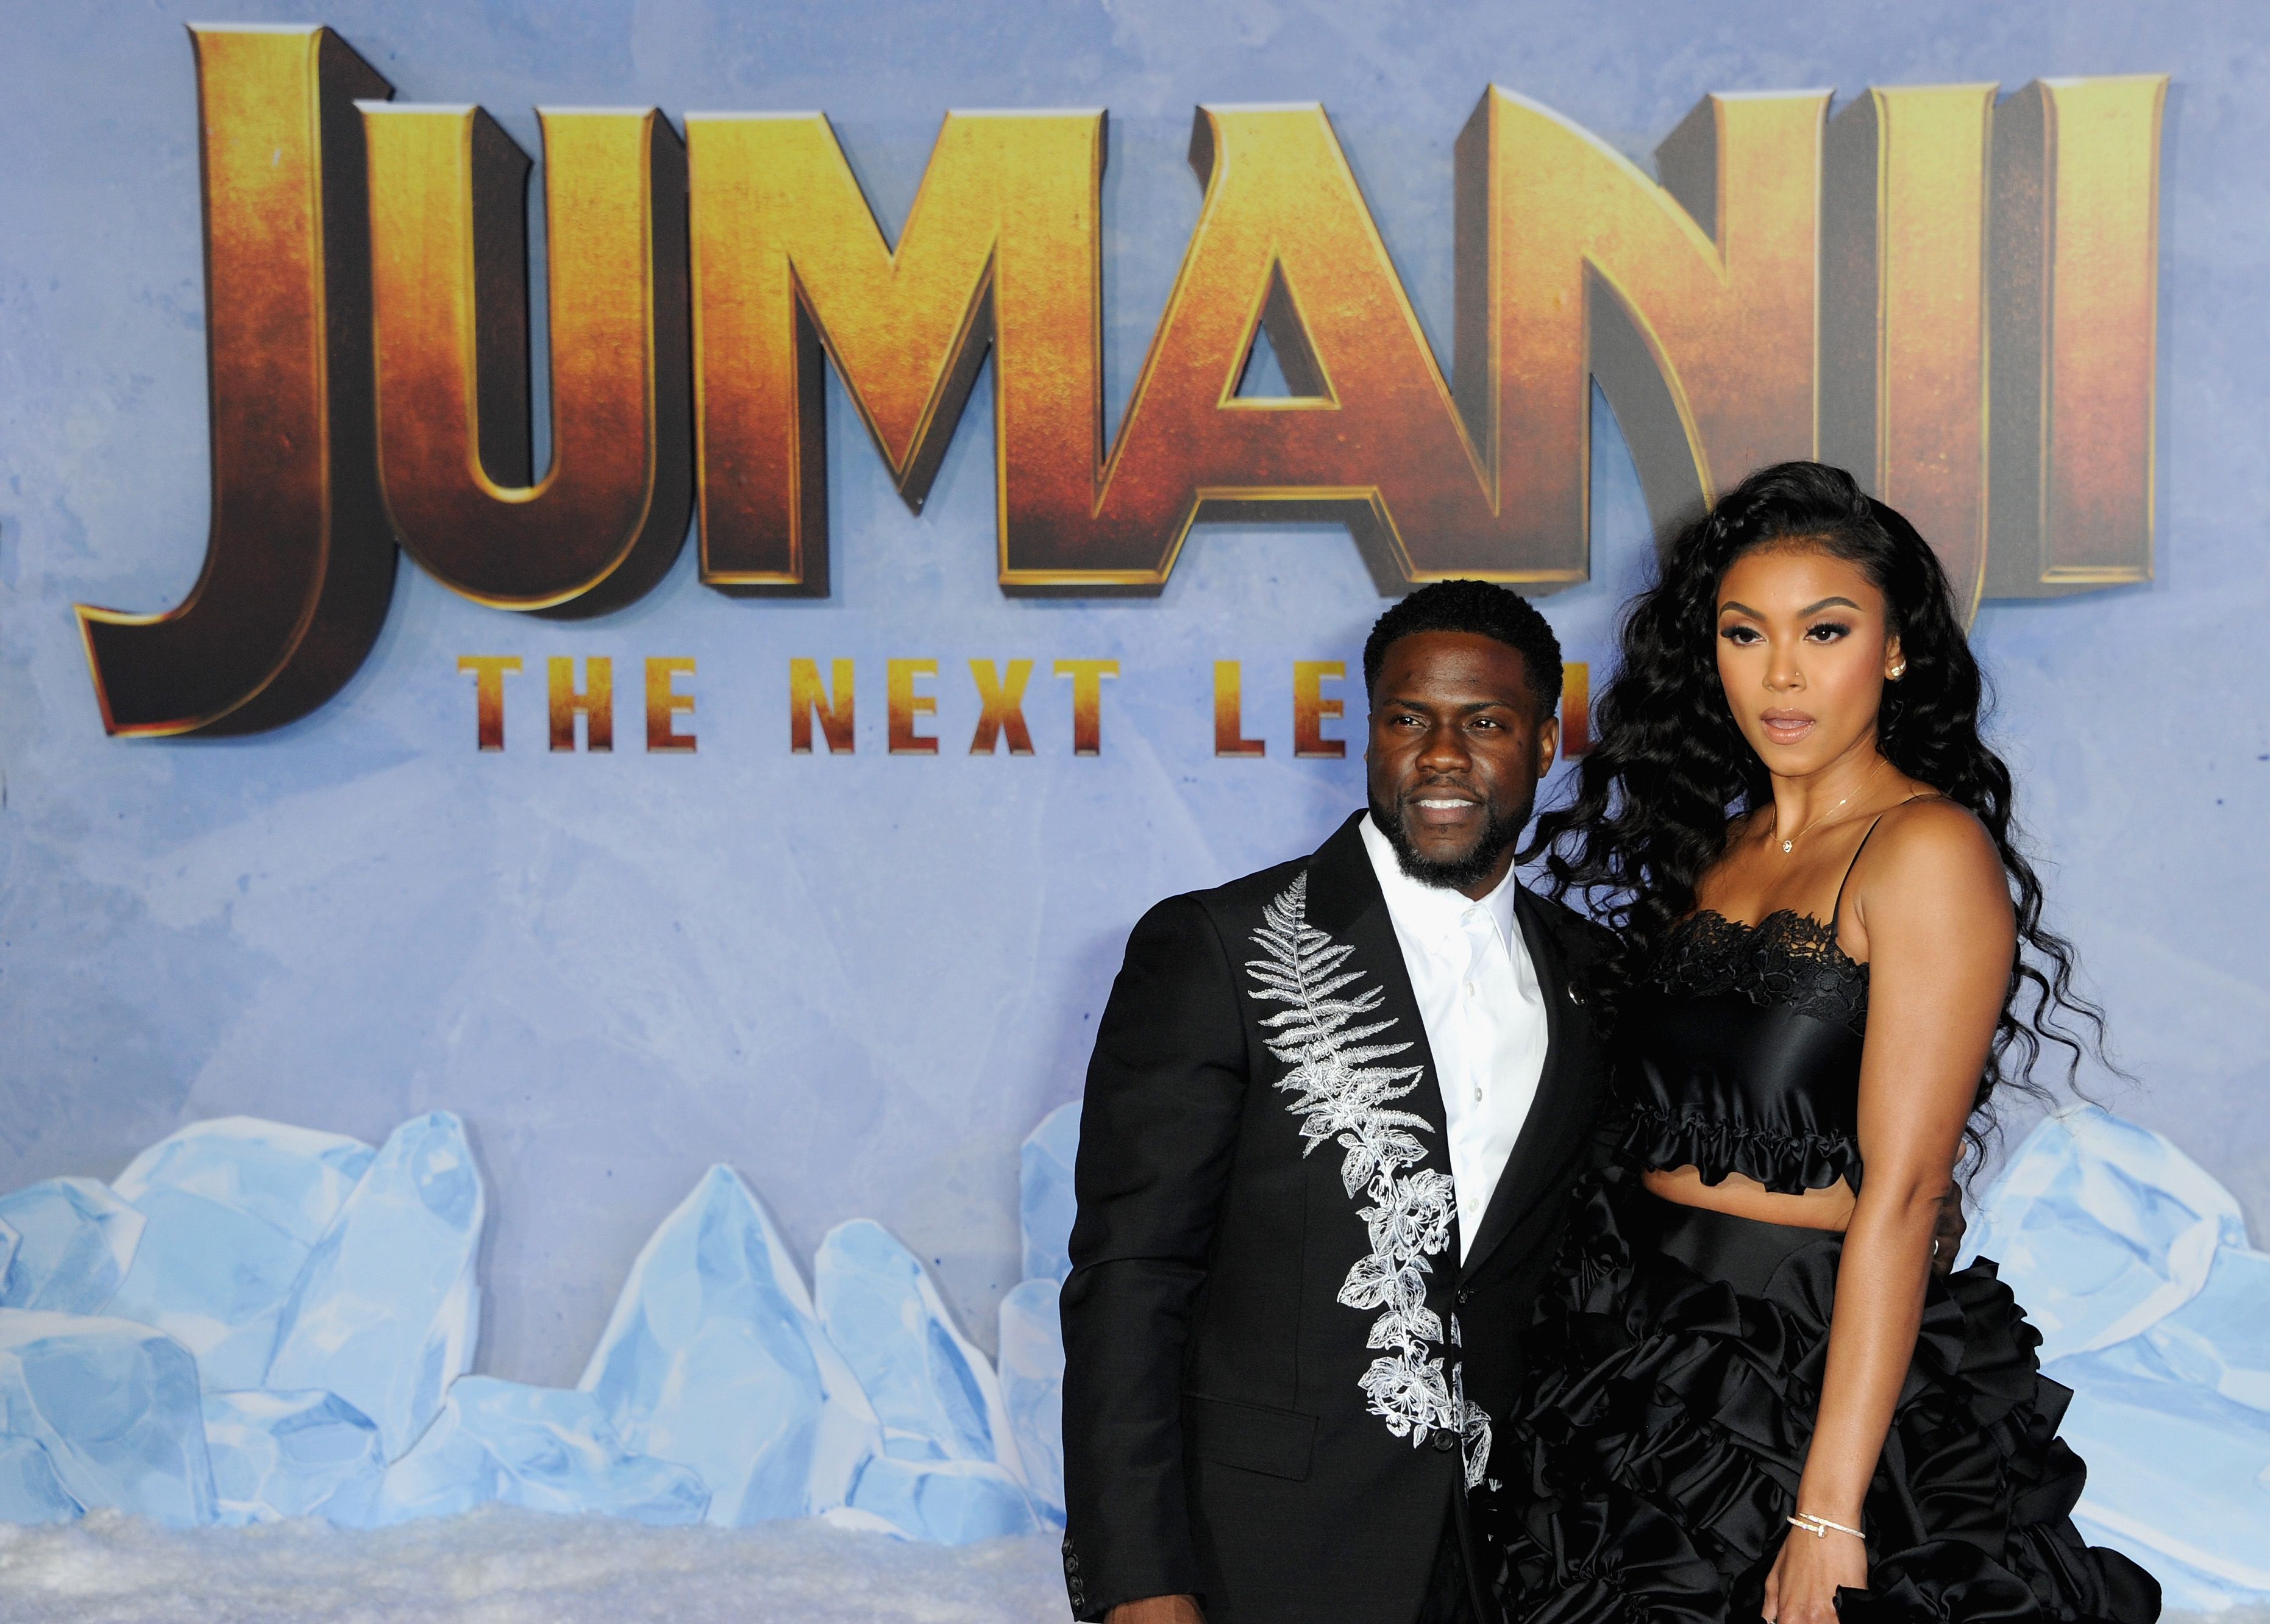  Kevin Hart and wife Eniko Parrish at the premiere of "Jumanji: The Next Level" in December 2019 in Hollywood, California | Source: Getty Images